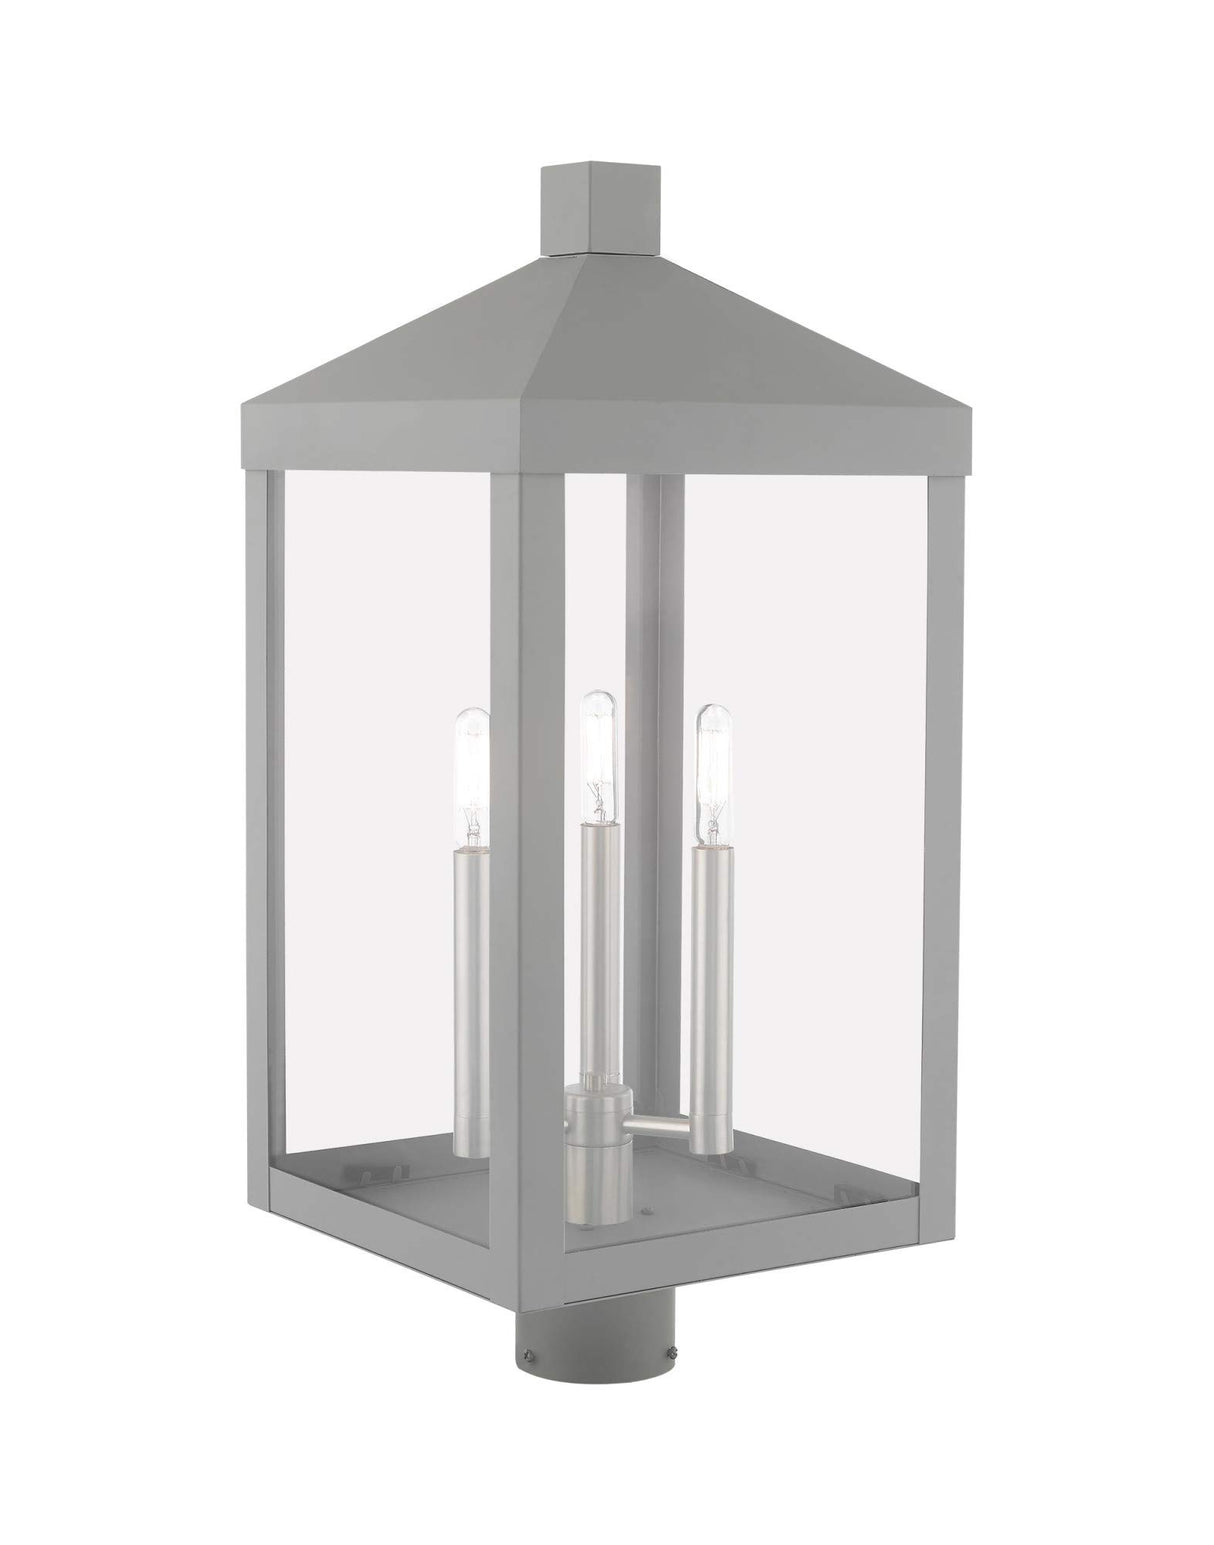 Livex Lighting 20586-91 Transitional Three Light Post-Top Lanterm from Nyack Collection in Pwt, Nckl, B/S, Slvr. Finish, 10.50 inches, Medium, Brushed Nickel